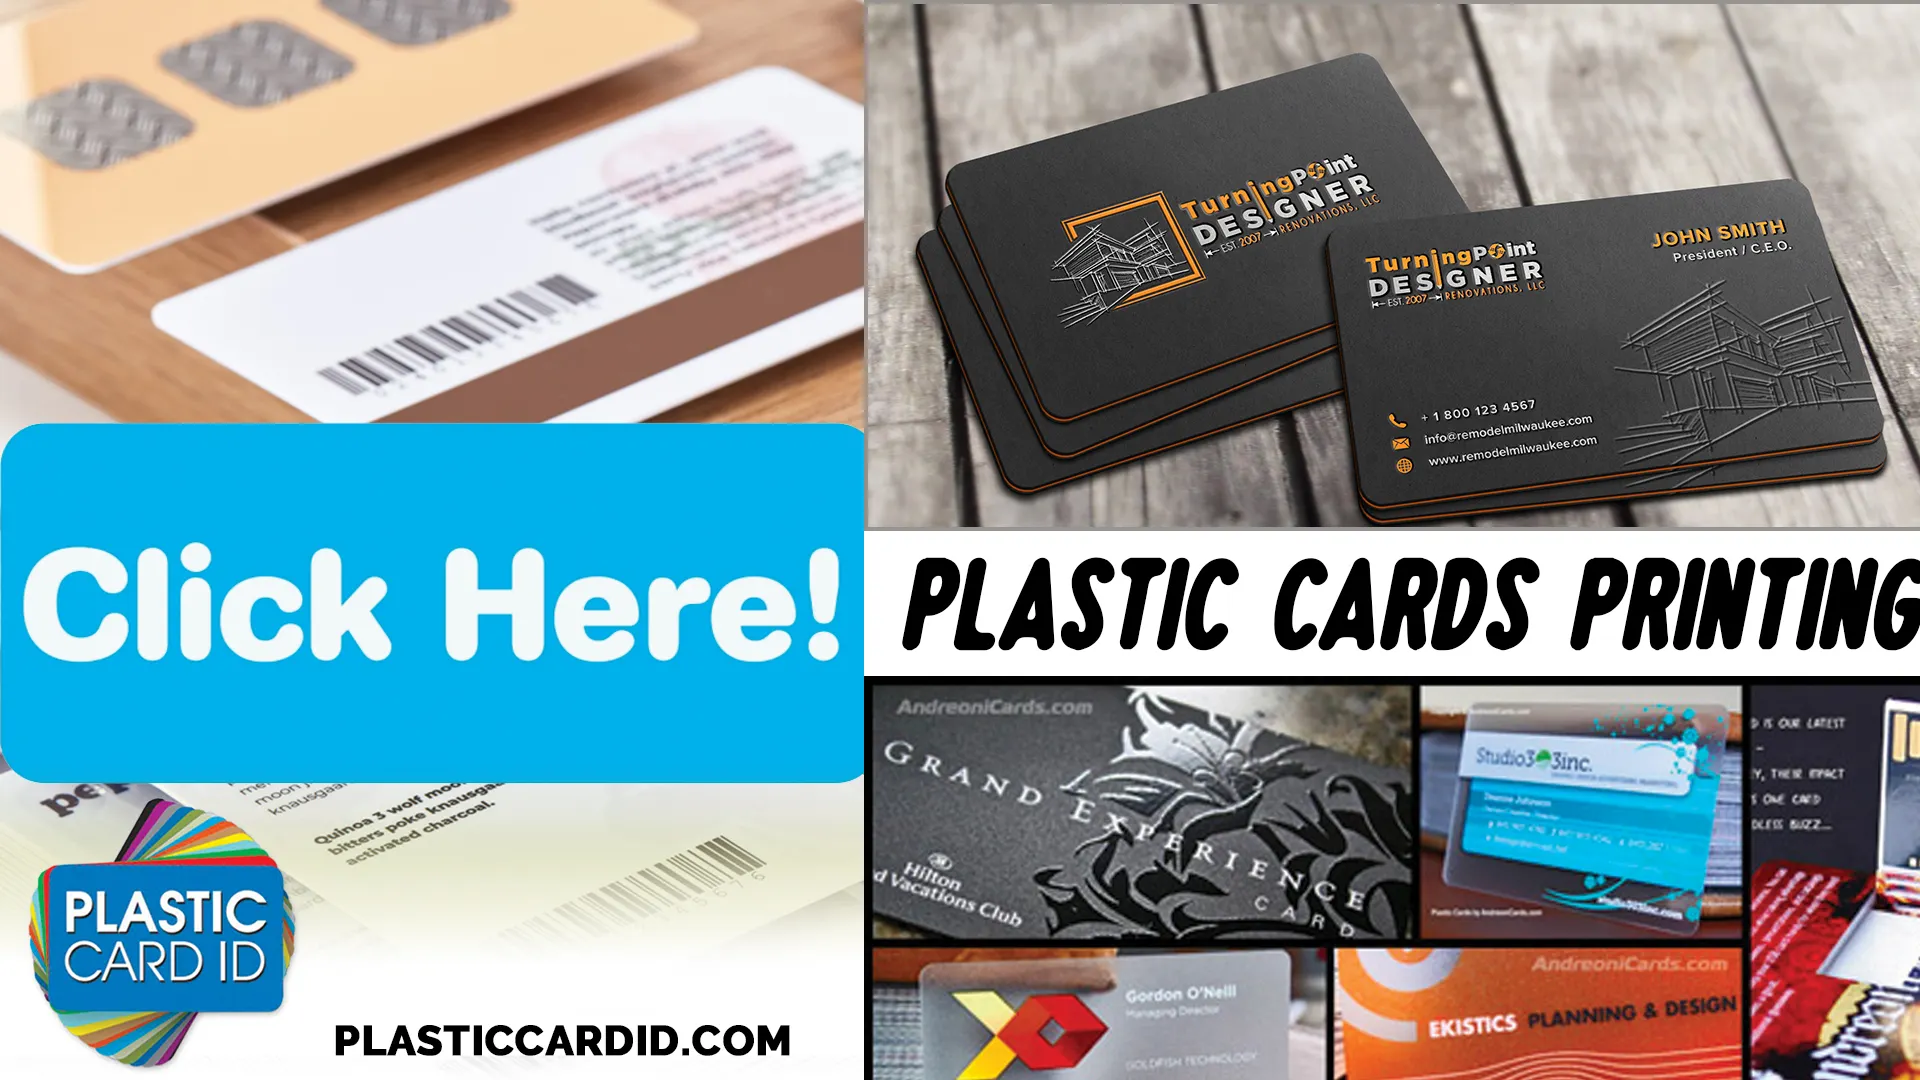 Building a Fortress of Trust with Plastic Card ID




: A Case Study Exploration